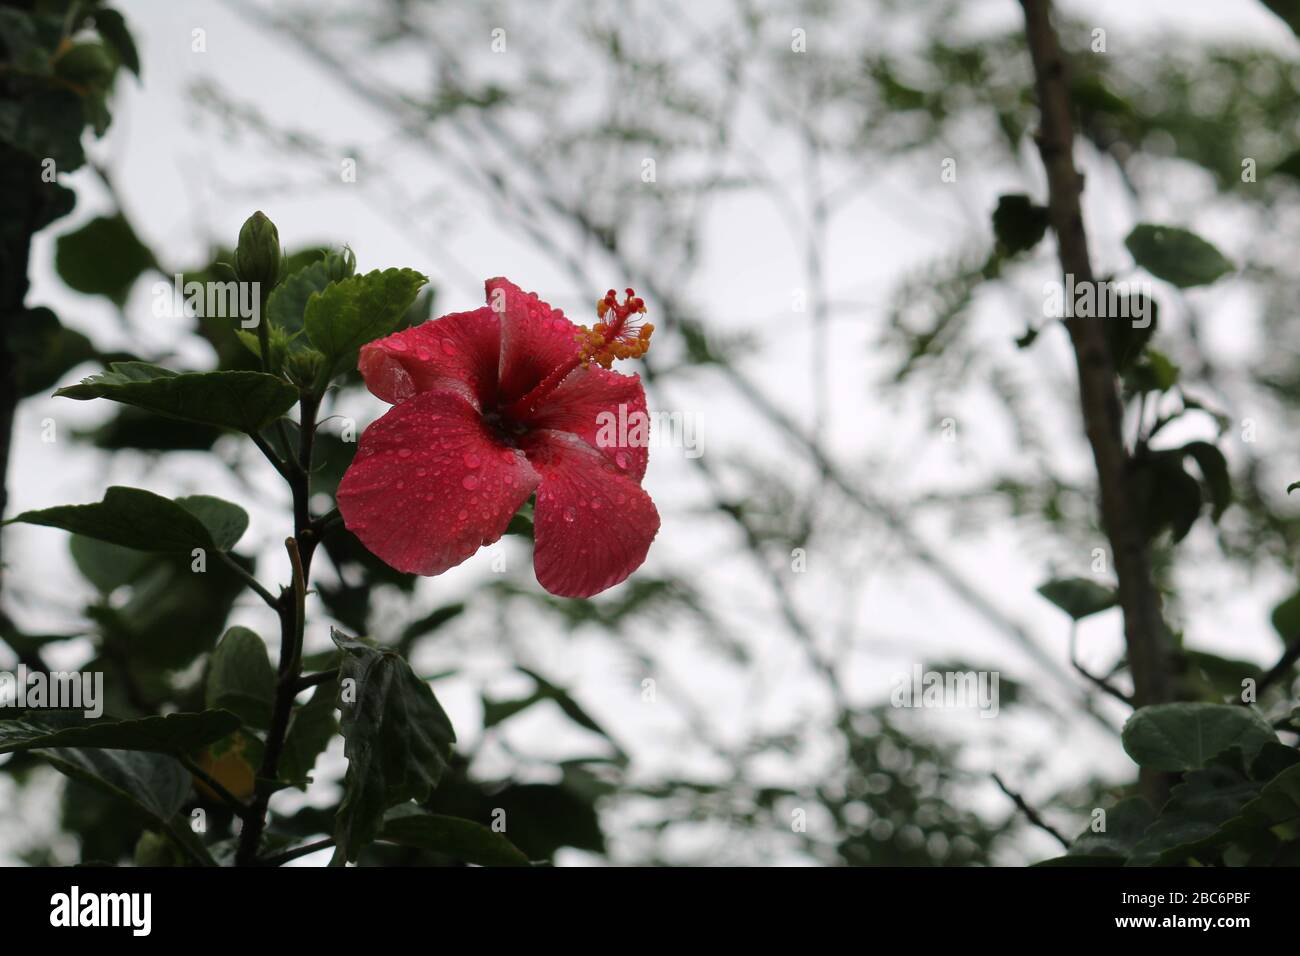 Hibiscus flower in blooming having droplets with blur background, Shoe flower red. Stock Photo